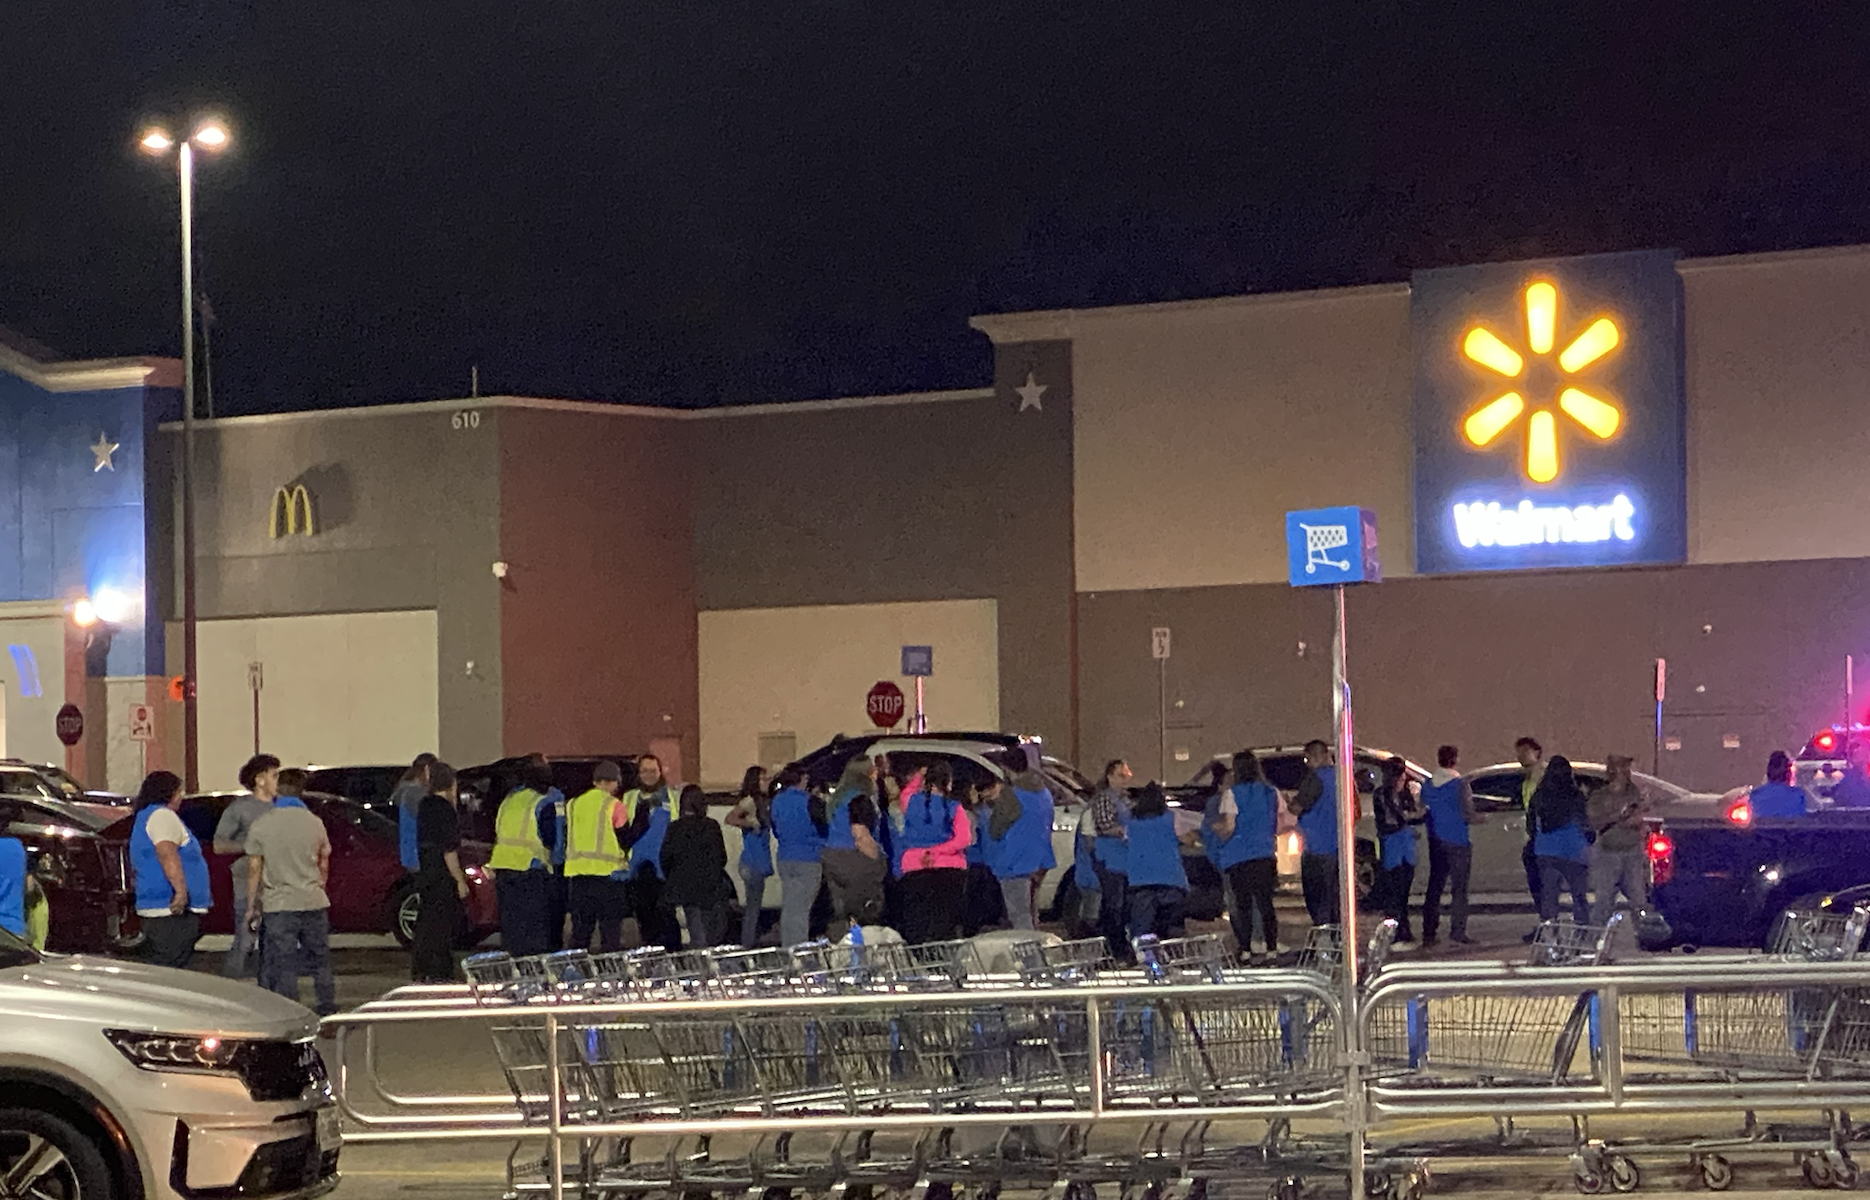 BREAKING NEWS: WATCH as the 29th Street Wal-Mart has been Evacuated